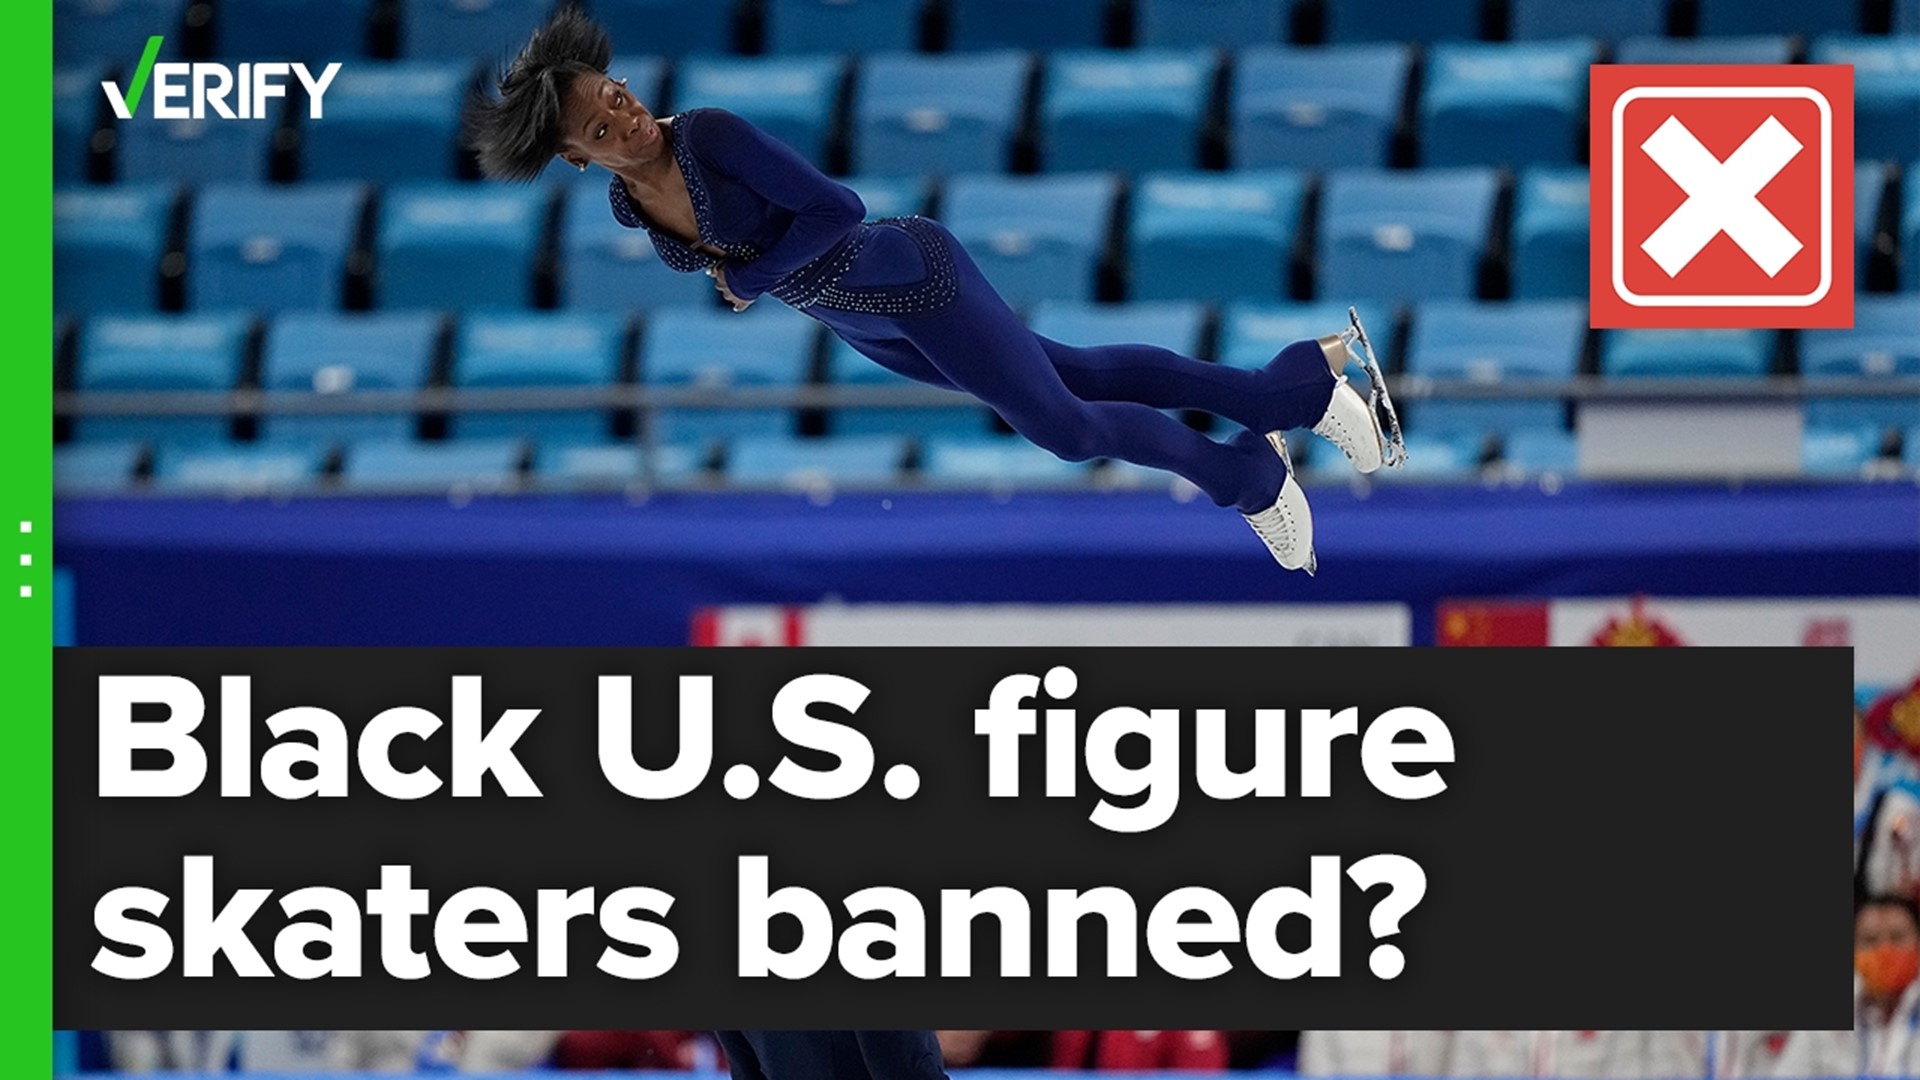 Were Black athletes in the U.S. once banned from competing in figure skating?  The VERIFY team confirms this is false.